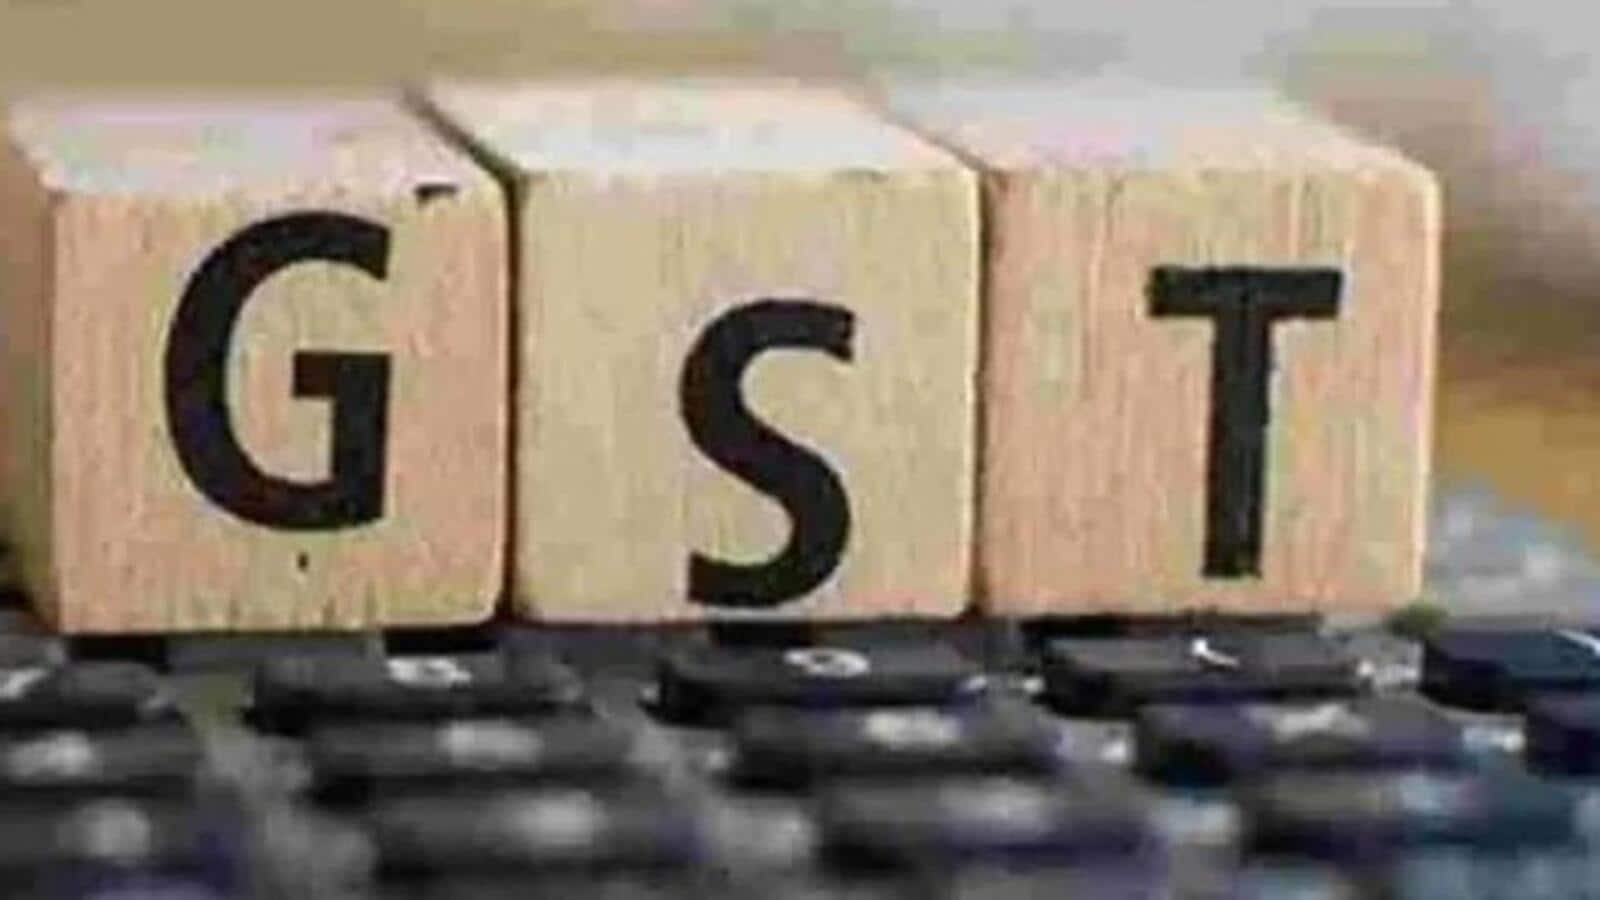 September GST collection at ₹1.48 lakh crore, the third highest ever